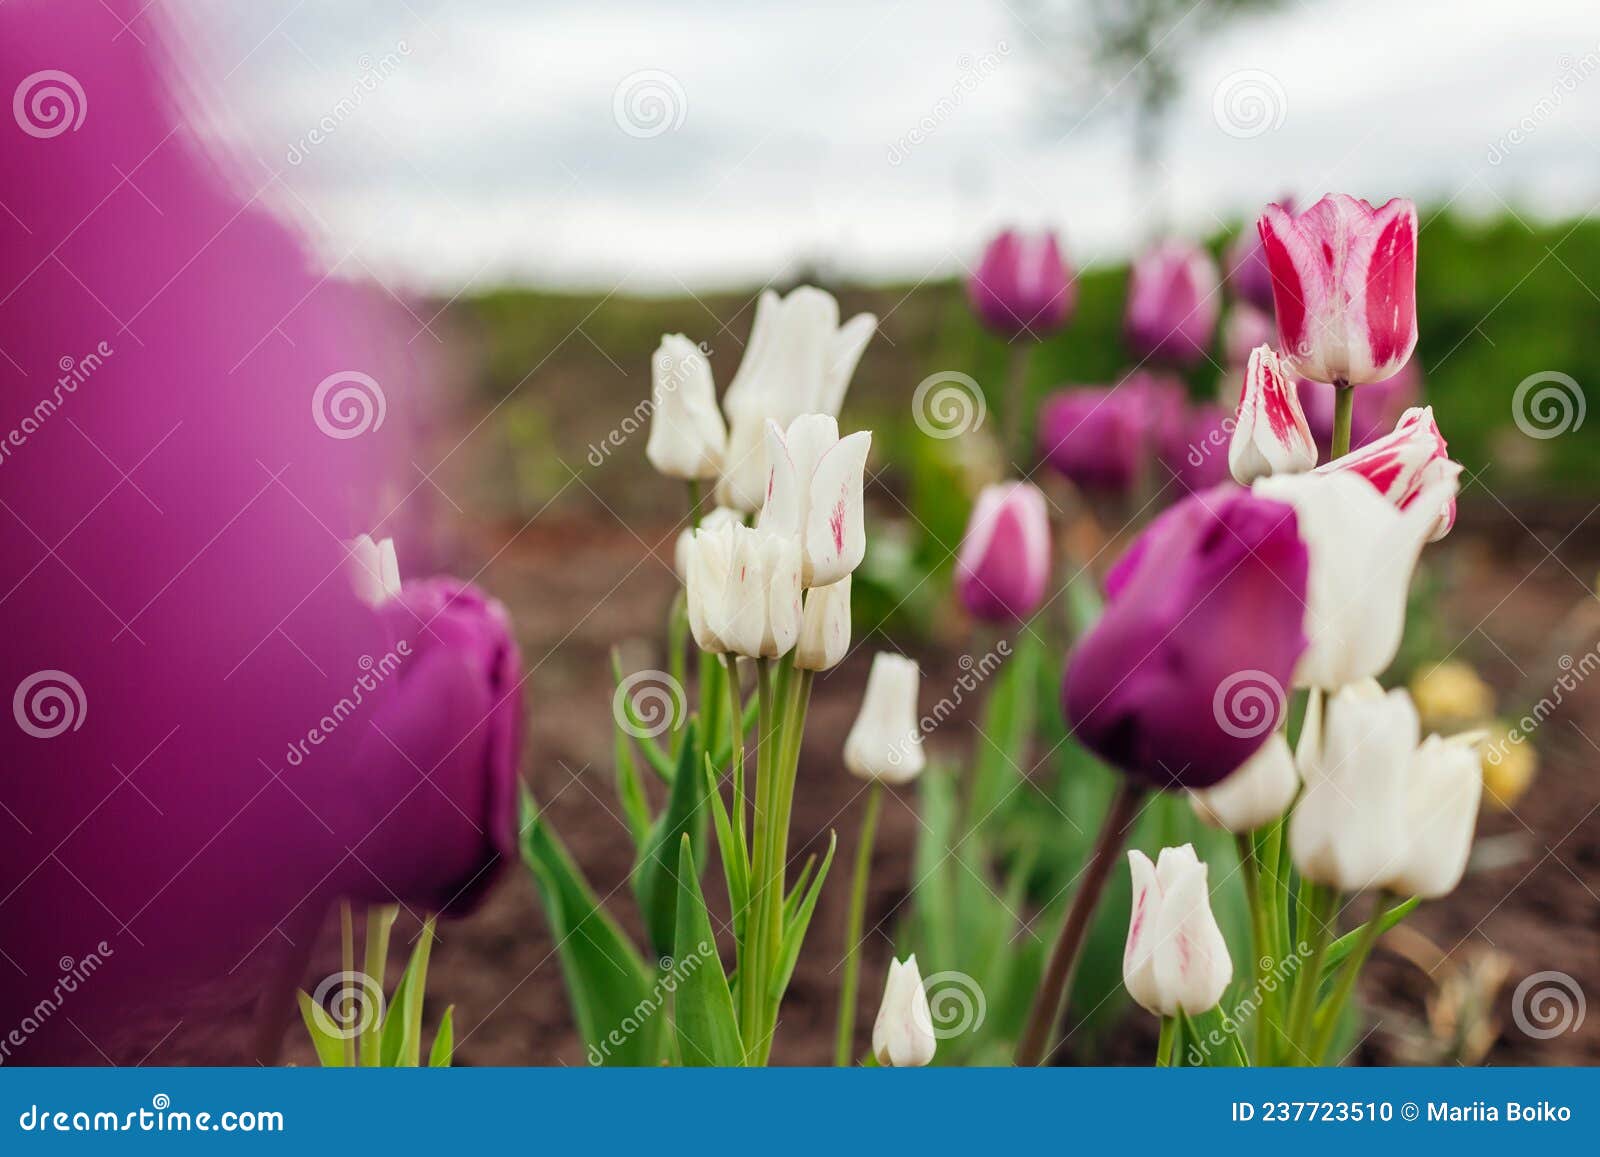 close up of pink tulips growing in spring garden. negrita and candy club variety. flowers blooming outdoors in may